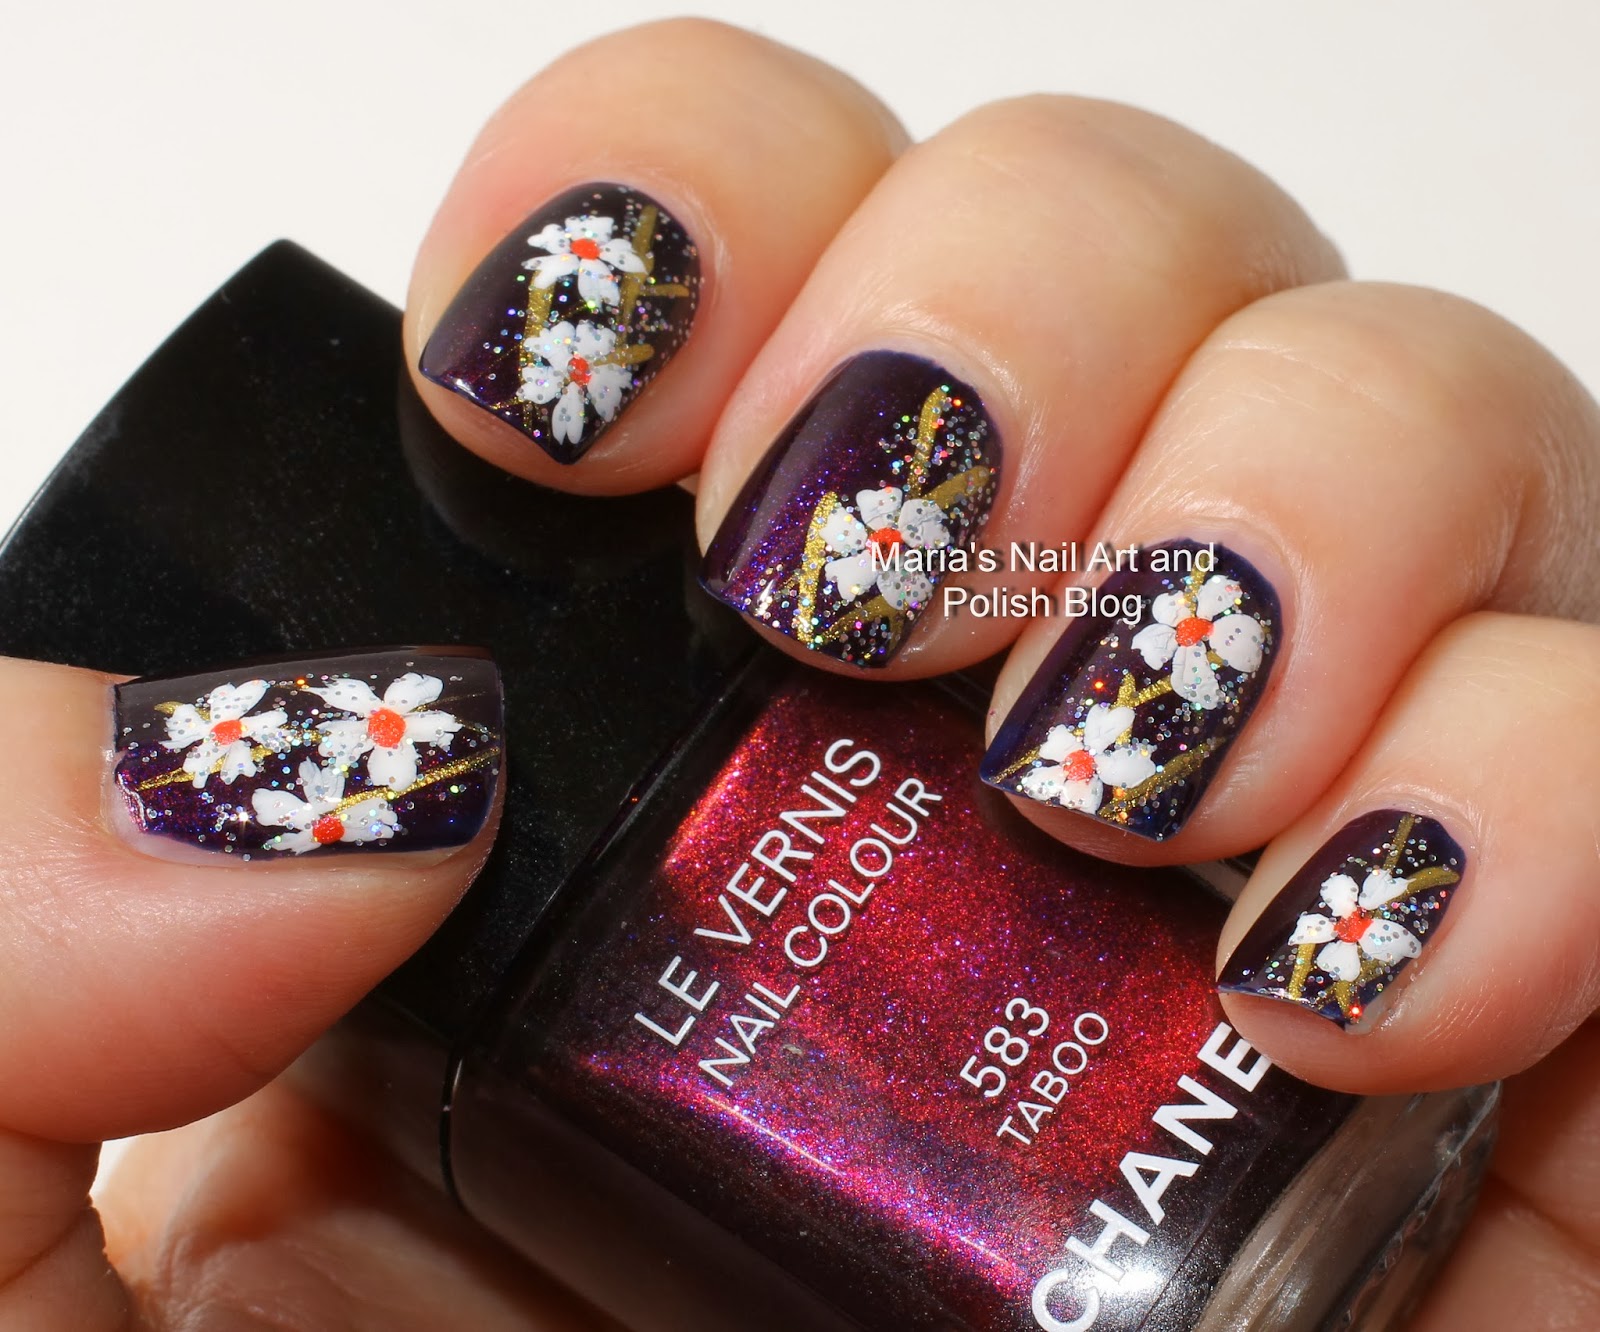 Marias Nail Art and Polish Blog: Flowers drenched in confetti are not taboo